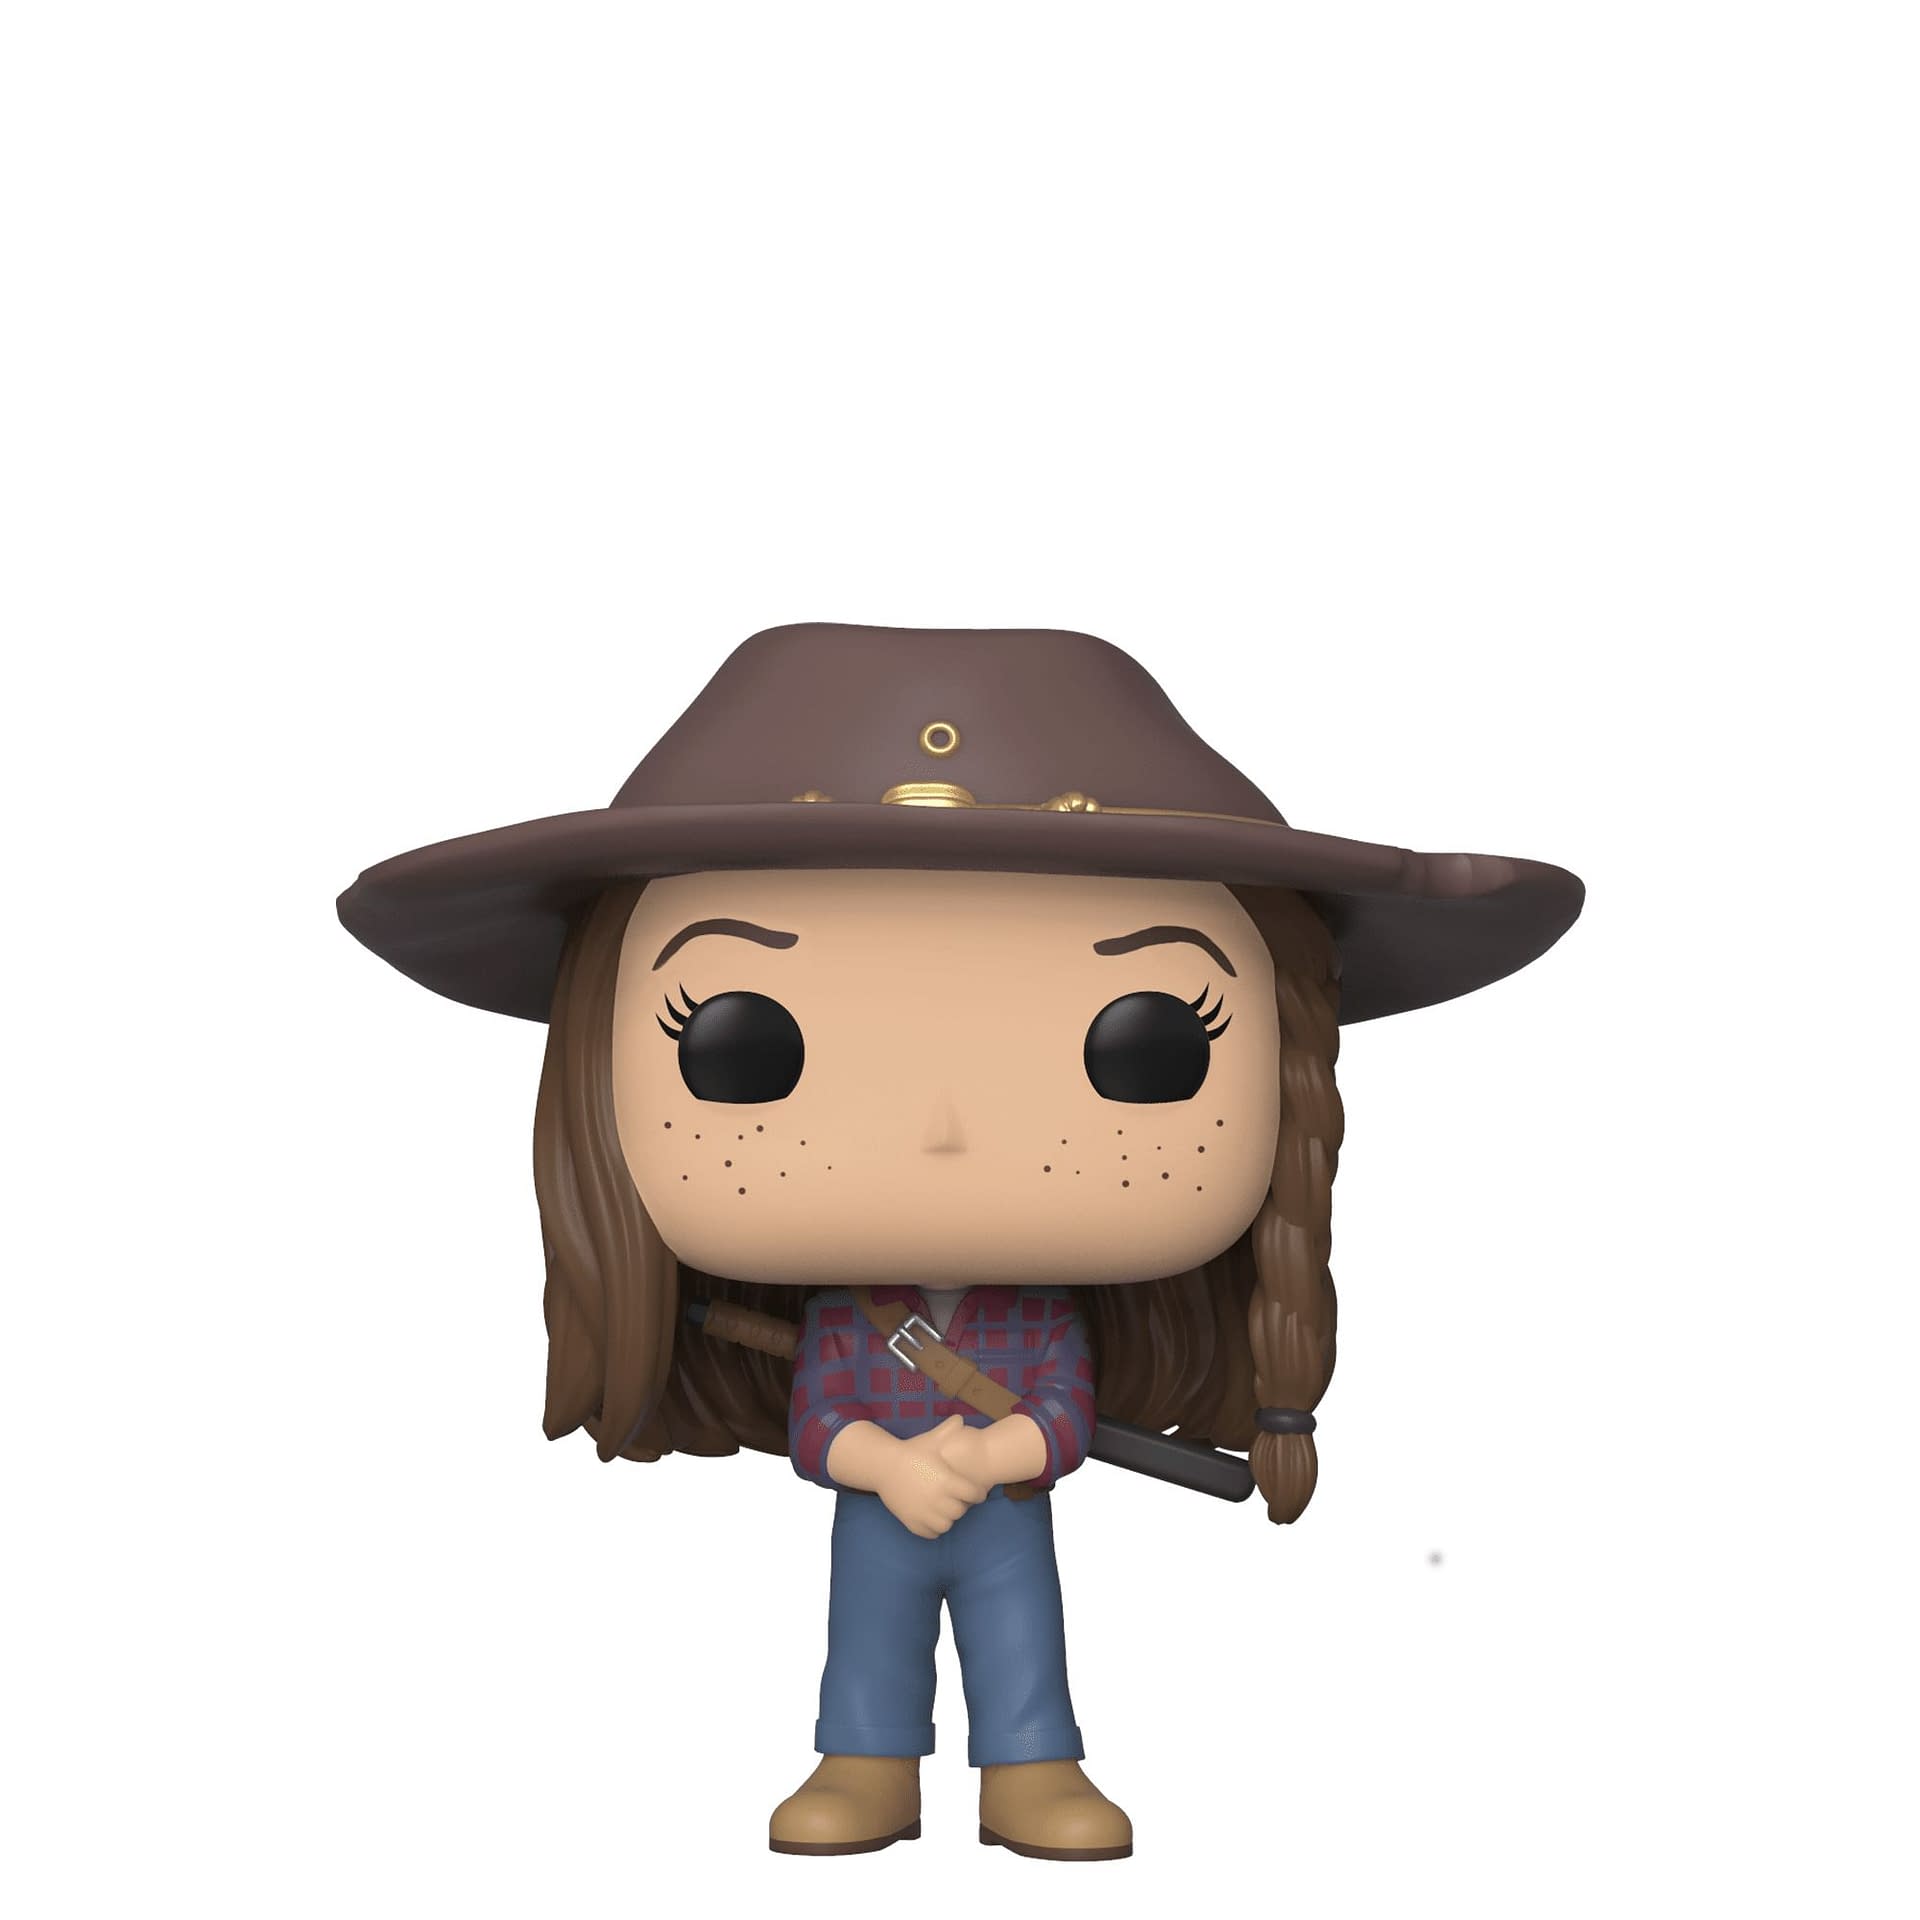 "The Walking Dead" Rises Again with New Wave of Funko Pops